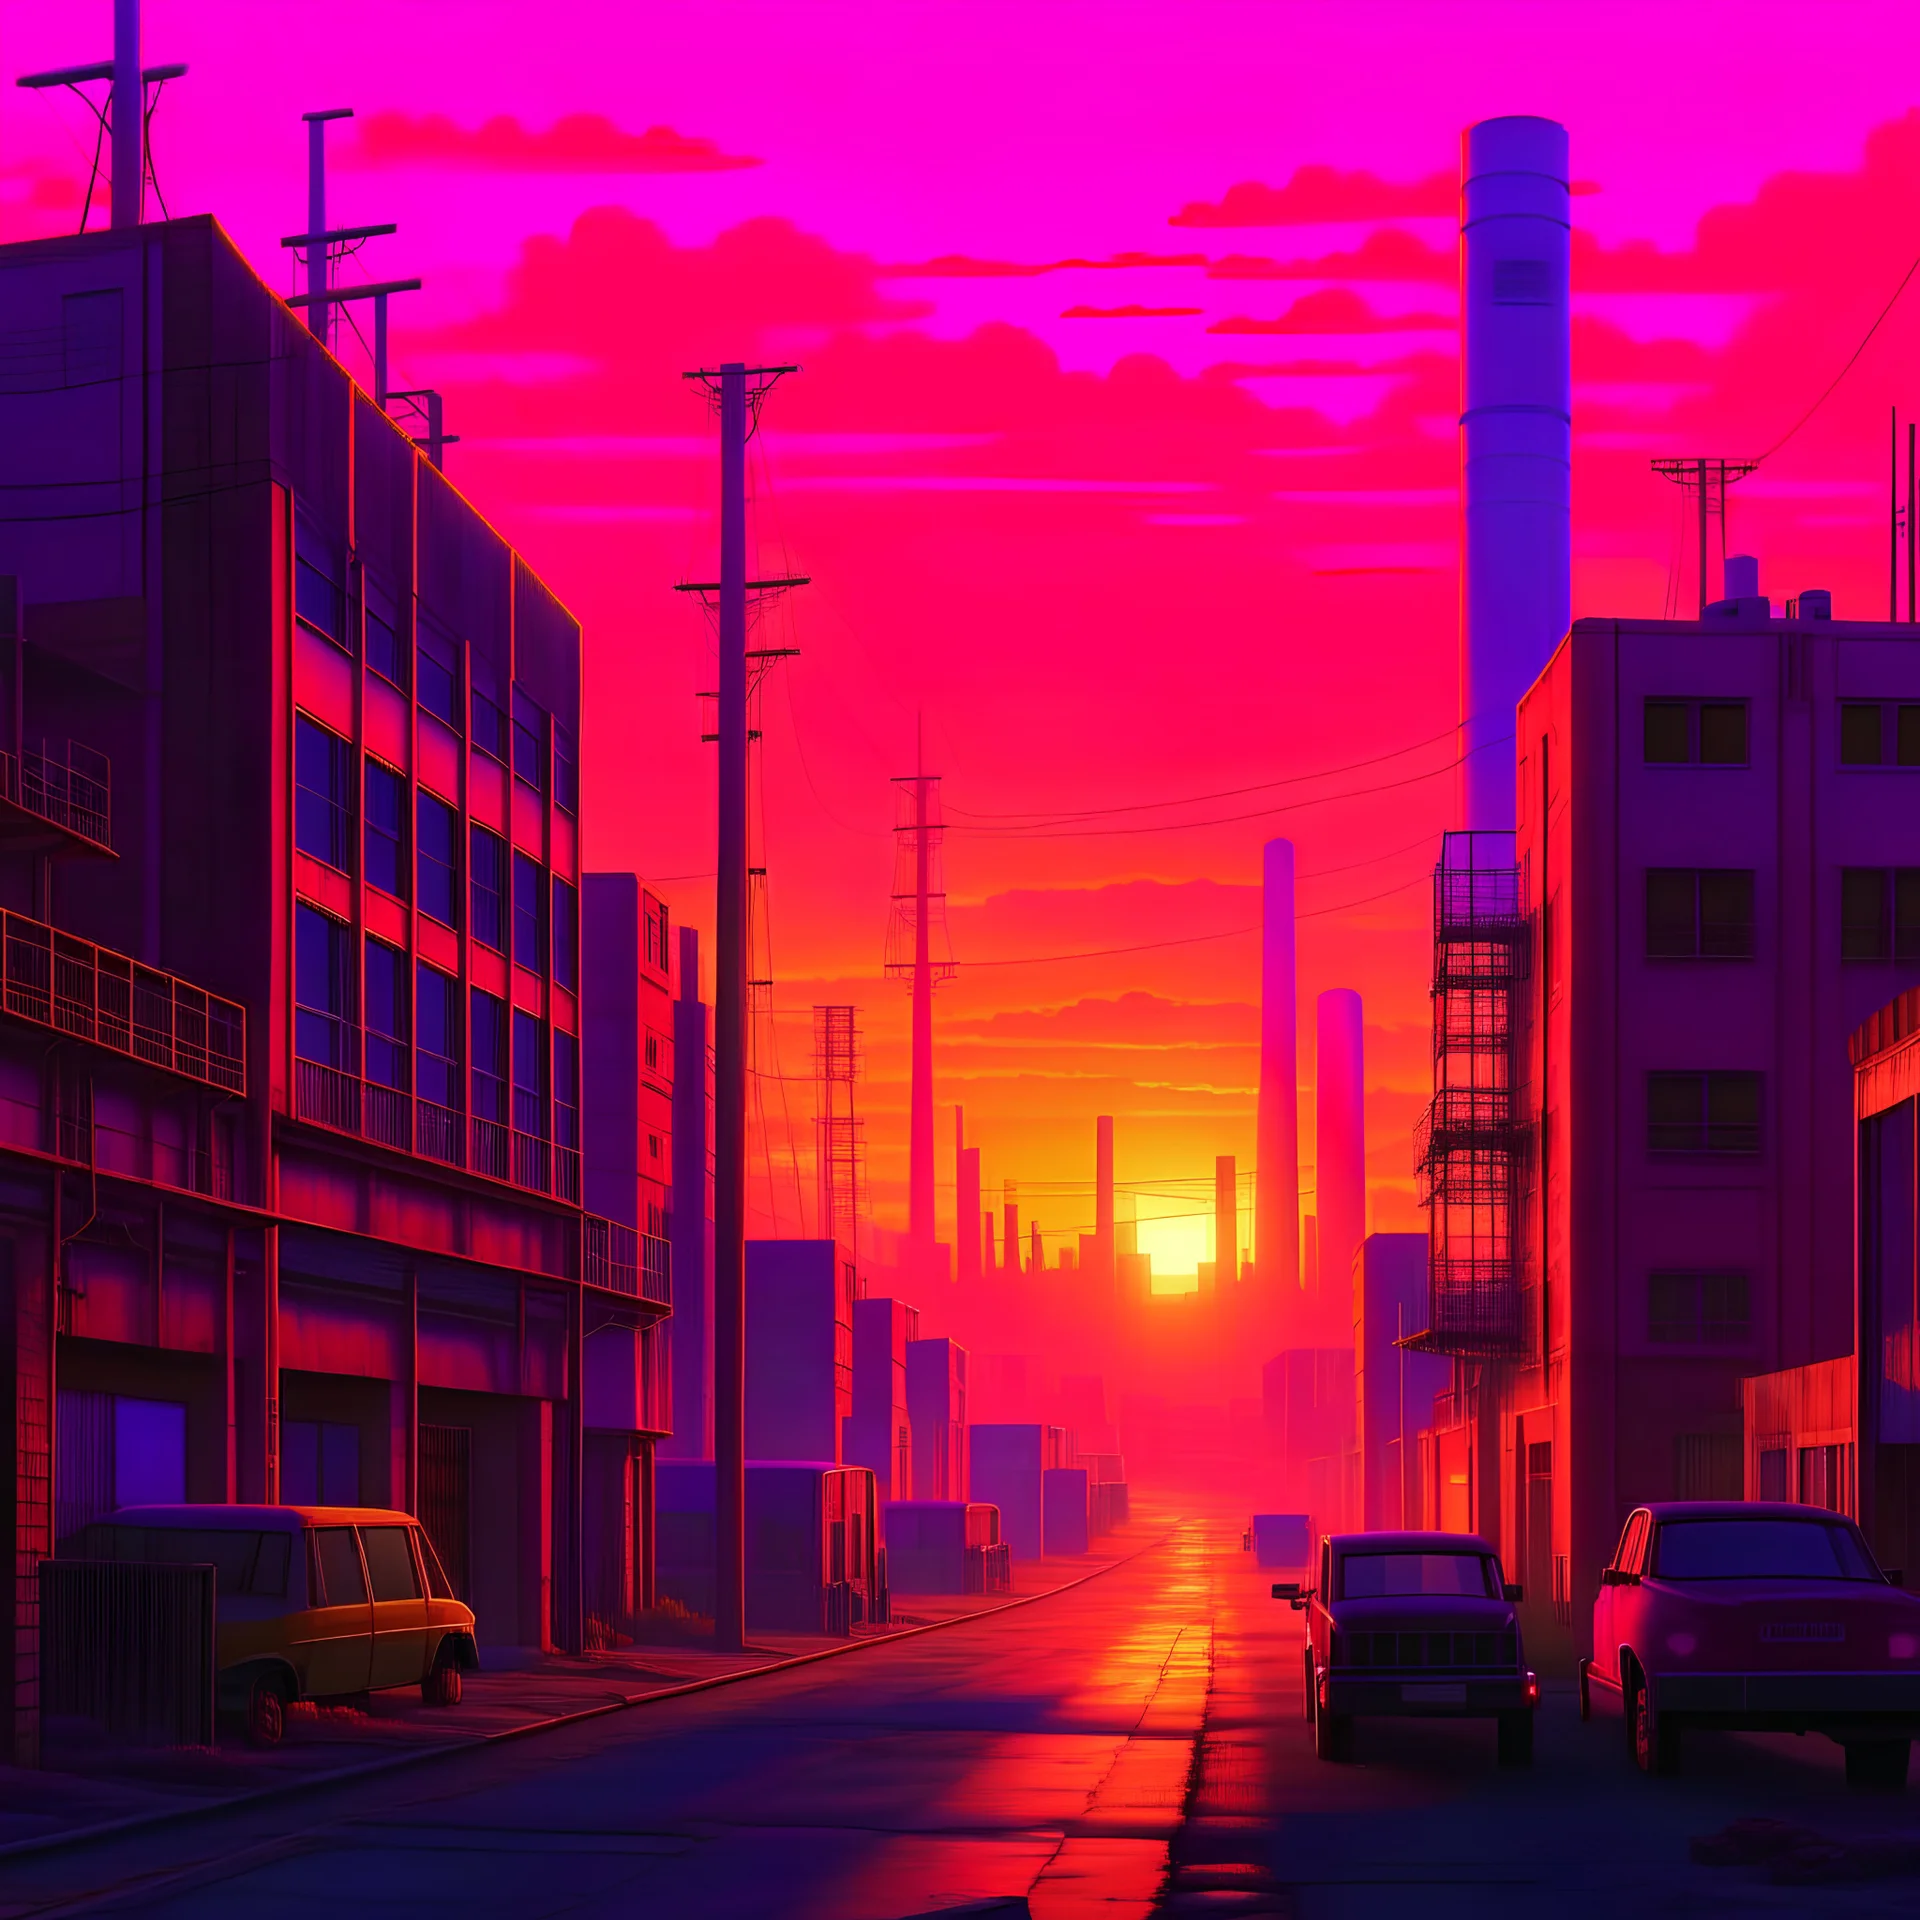 a dystopian street scene with factories and a synthwave sunset